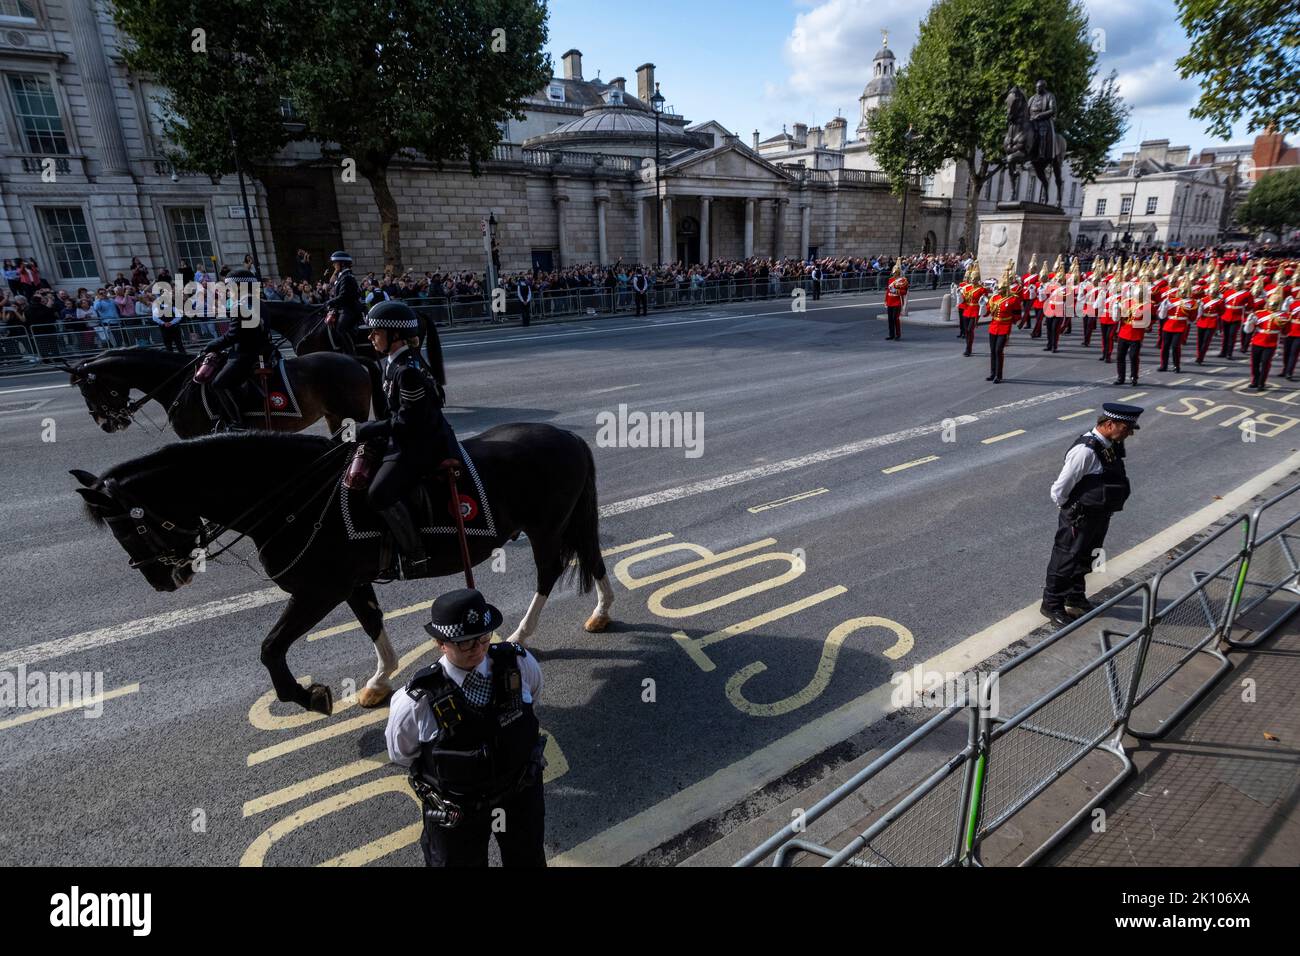 London, UK.  14 September 2022. Members of the police and Household cavalry precede the late Queen’s coffin carried on a gun carriage in Whitehall en route to Westminster Hall where it will lie in state for four days allowing the public to visit to pay their respects, ahead of the state funeral on 19 September.  Queen Elizabeth II, the longest-reigning monarch in British history, died at the age of 96 in Balmoral, Scotland and her son, now known as King Charles III, has succeeded her.  Credit: Stephen Chung / Alamy Live News Stock Photo